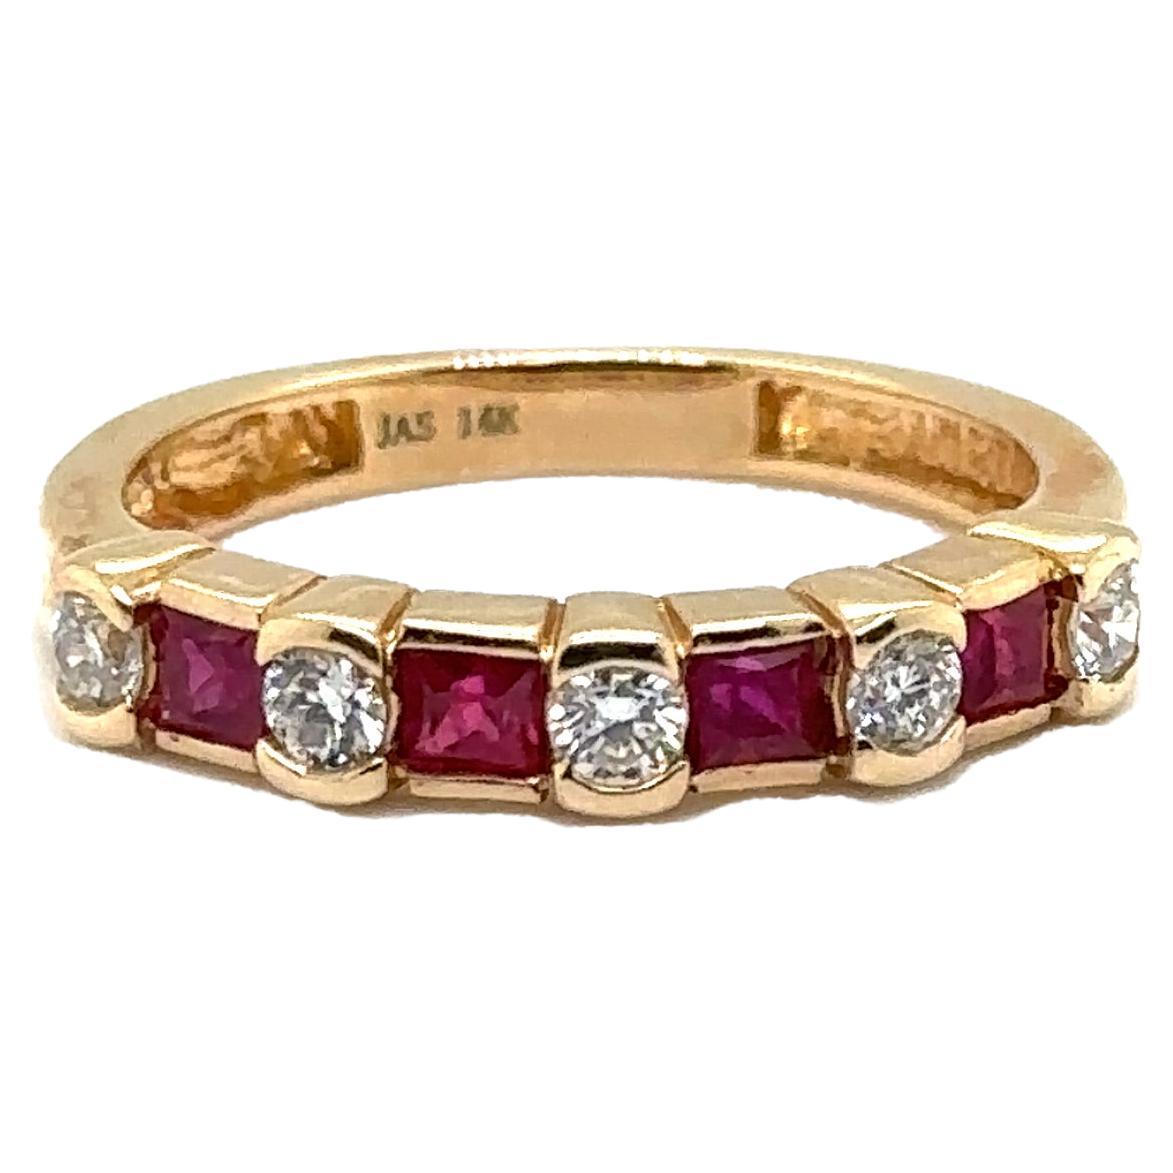 JAS-21-2221 - 14K YELLOW GOLD 0.35Ct GH-SI1 DIAS AND 0.40CT PRINCESS CUT RUBIES For Sale